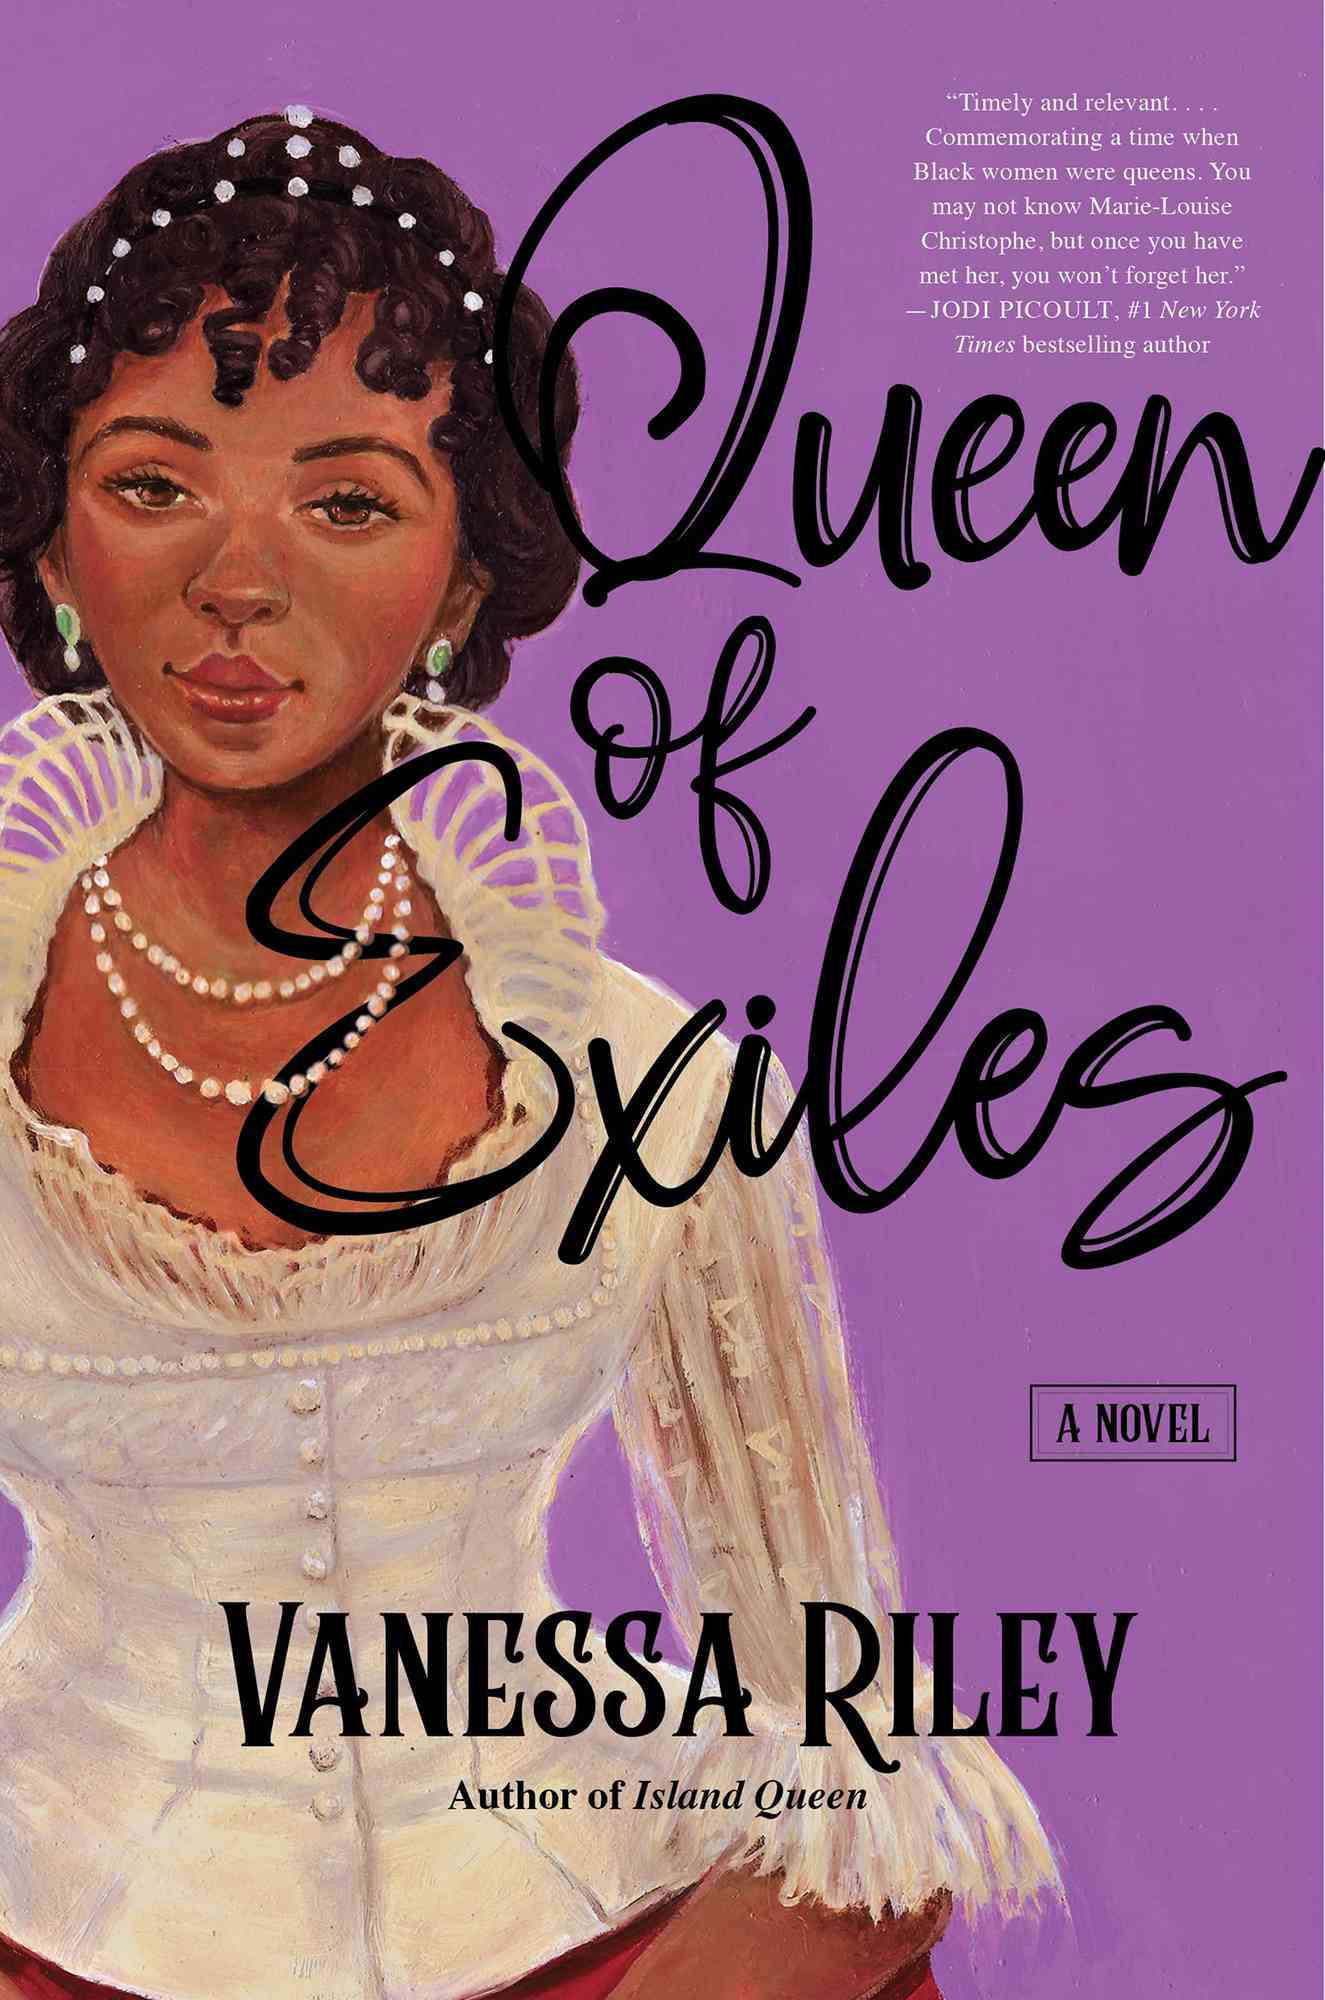 Queen of Exiles: A Novel Hardcover – Deckle Edge, July 11, 2023 by Vanessa Riley